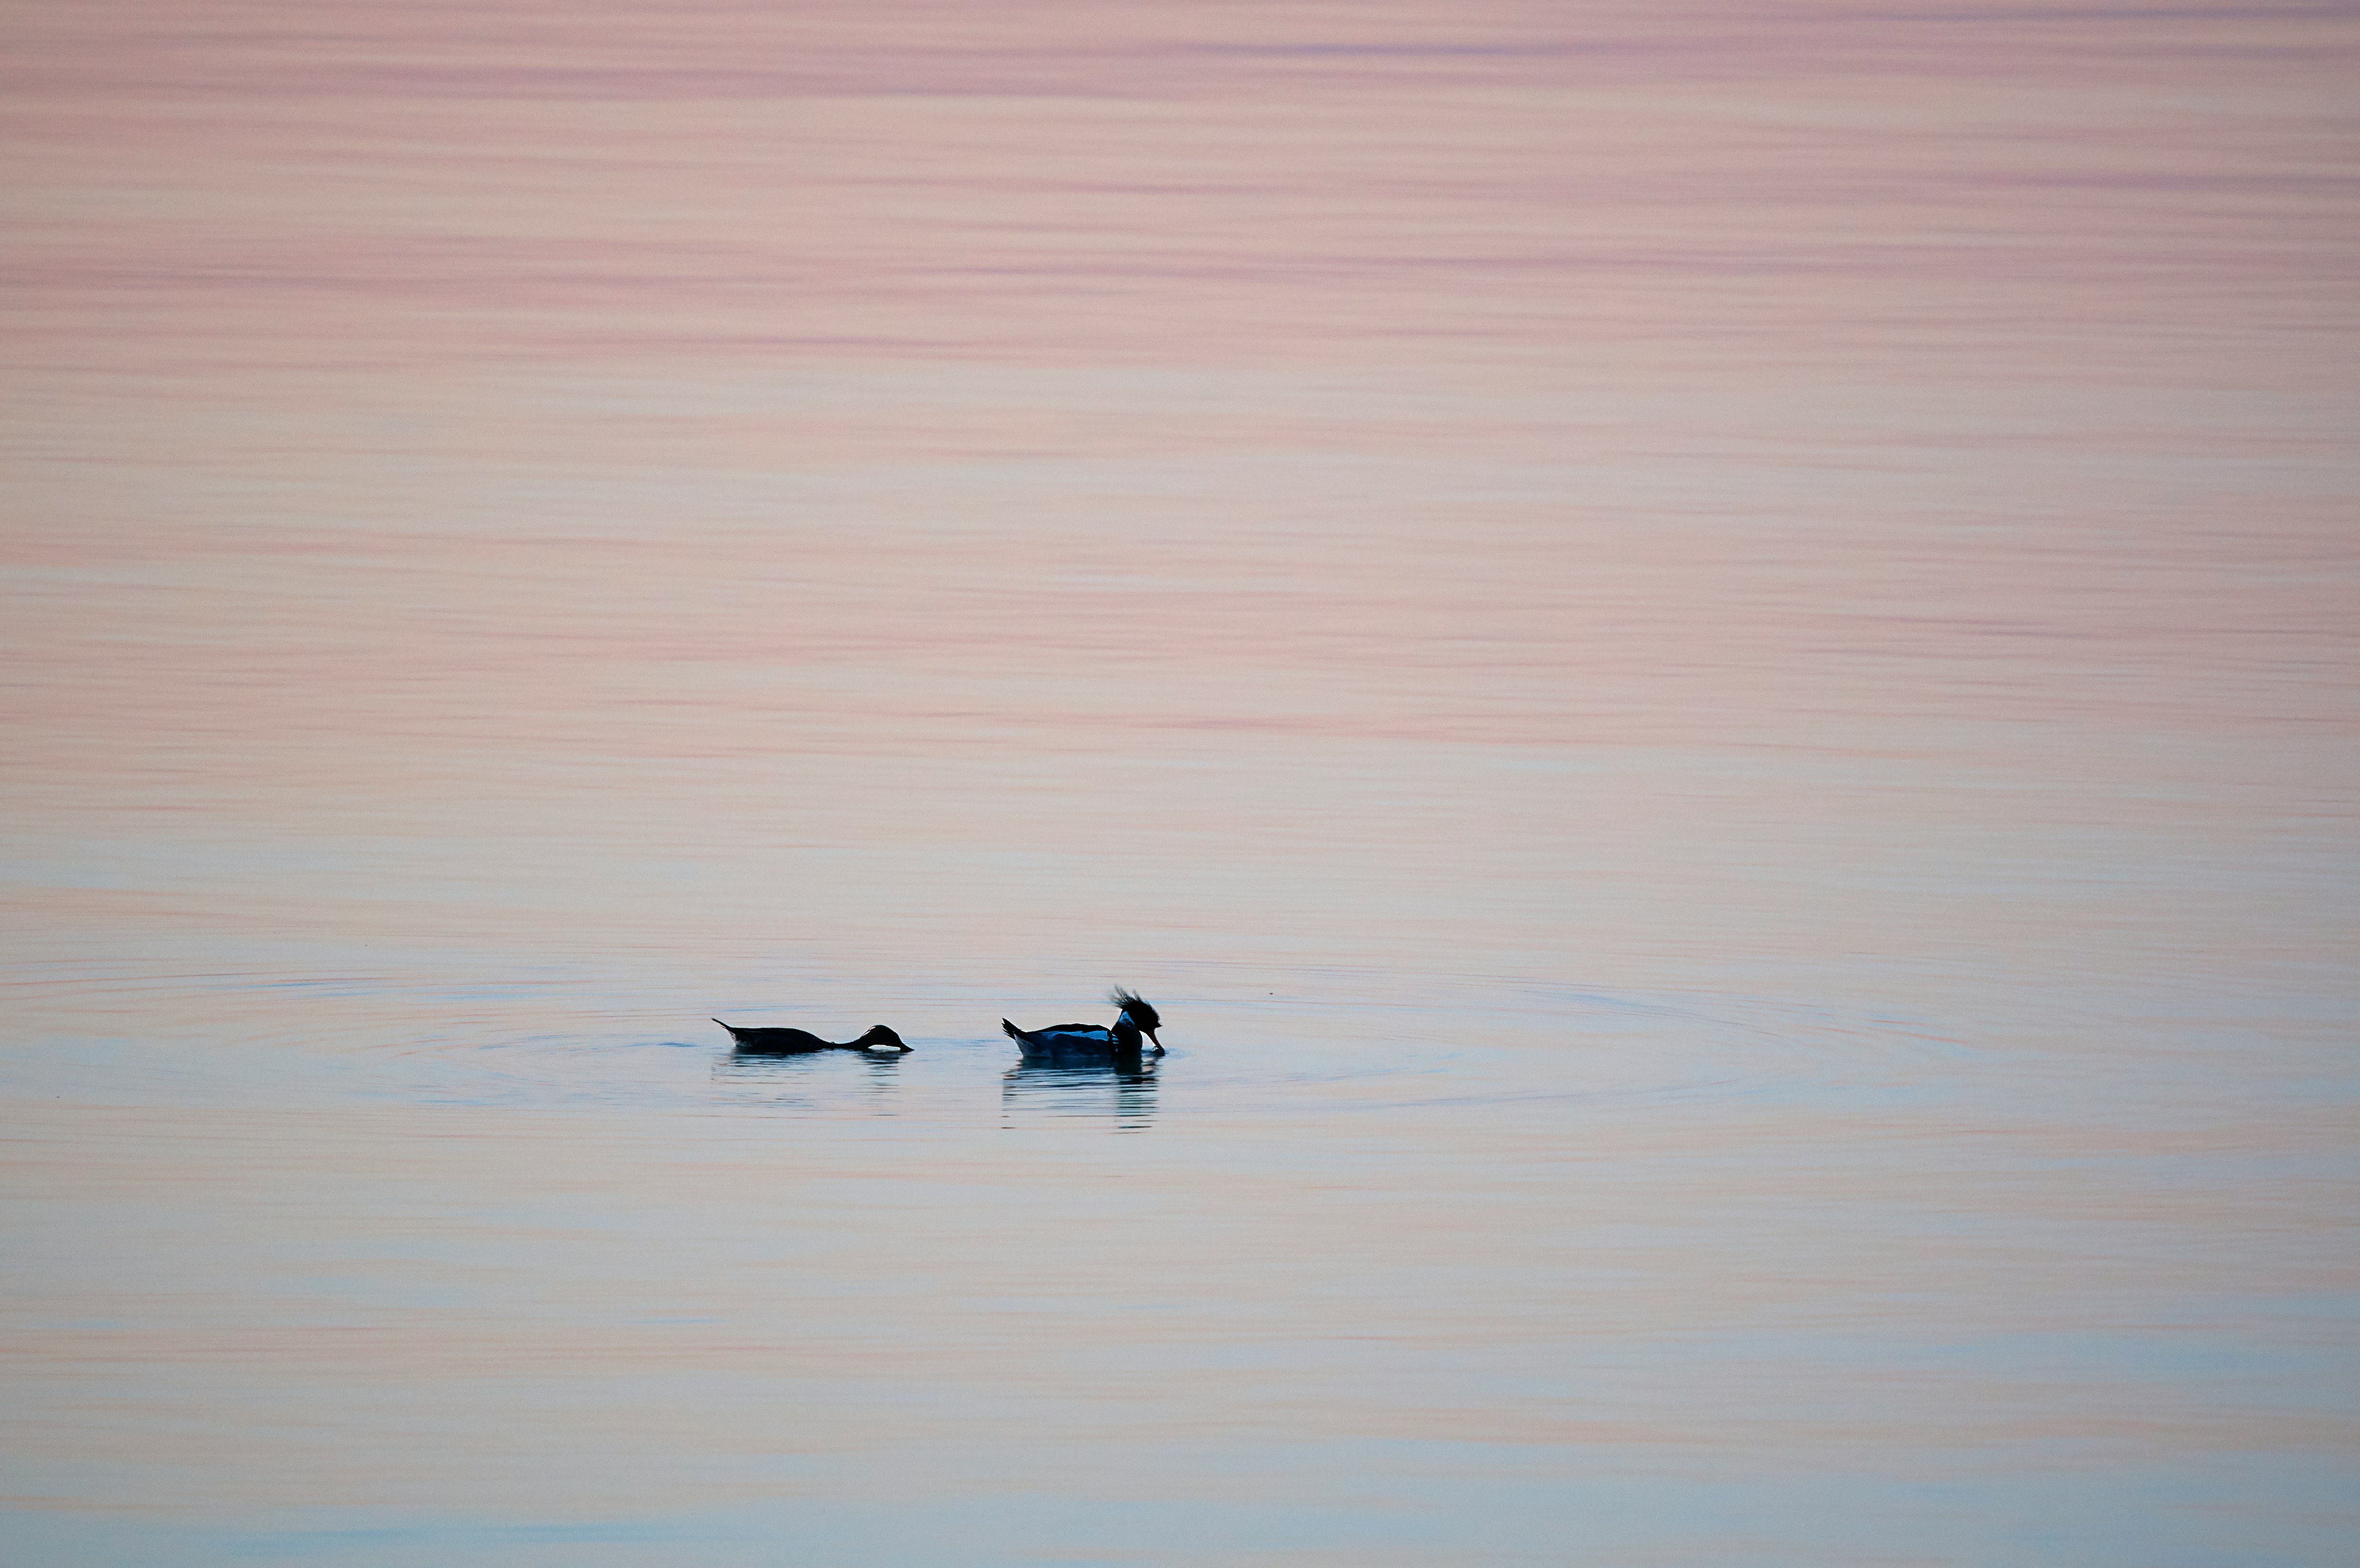 two black ducks on body of water